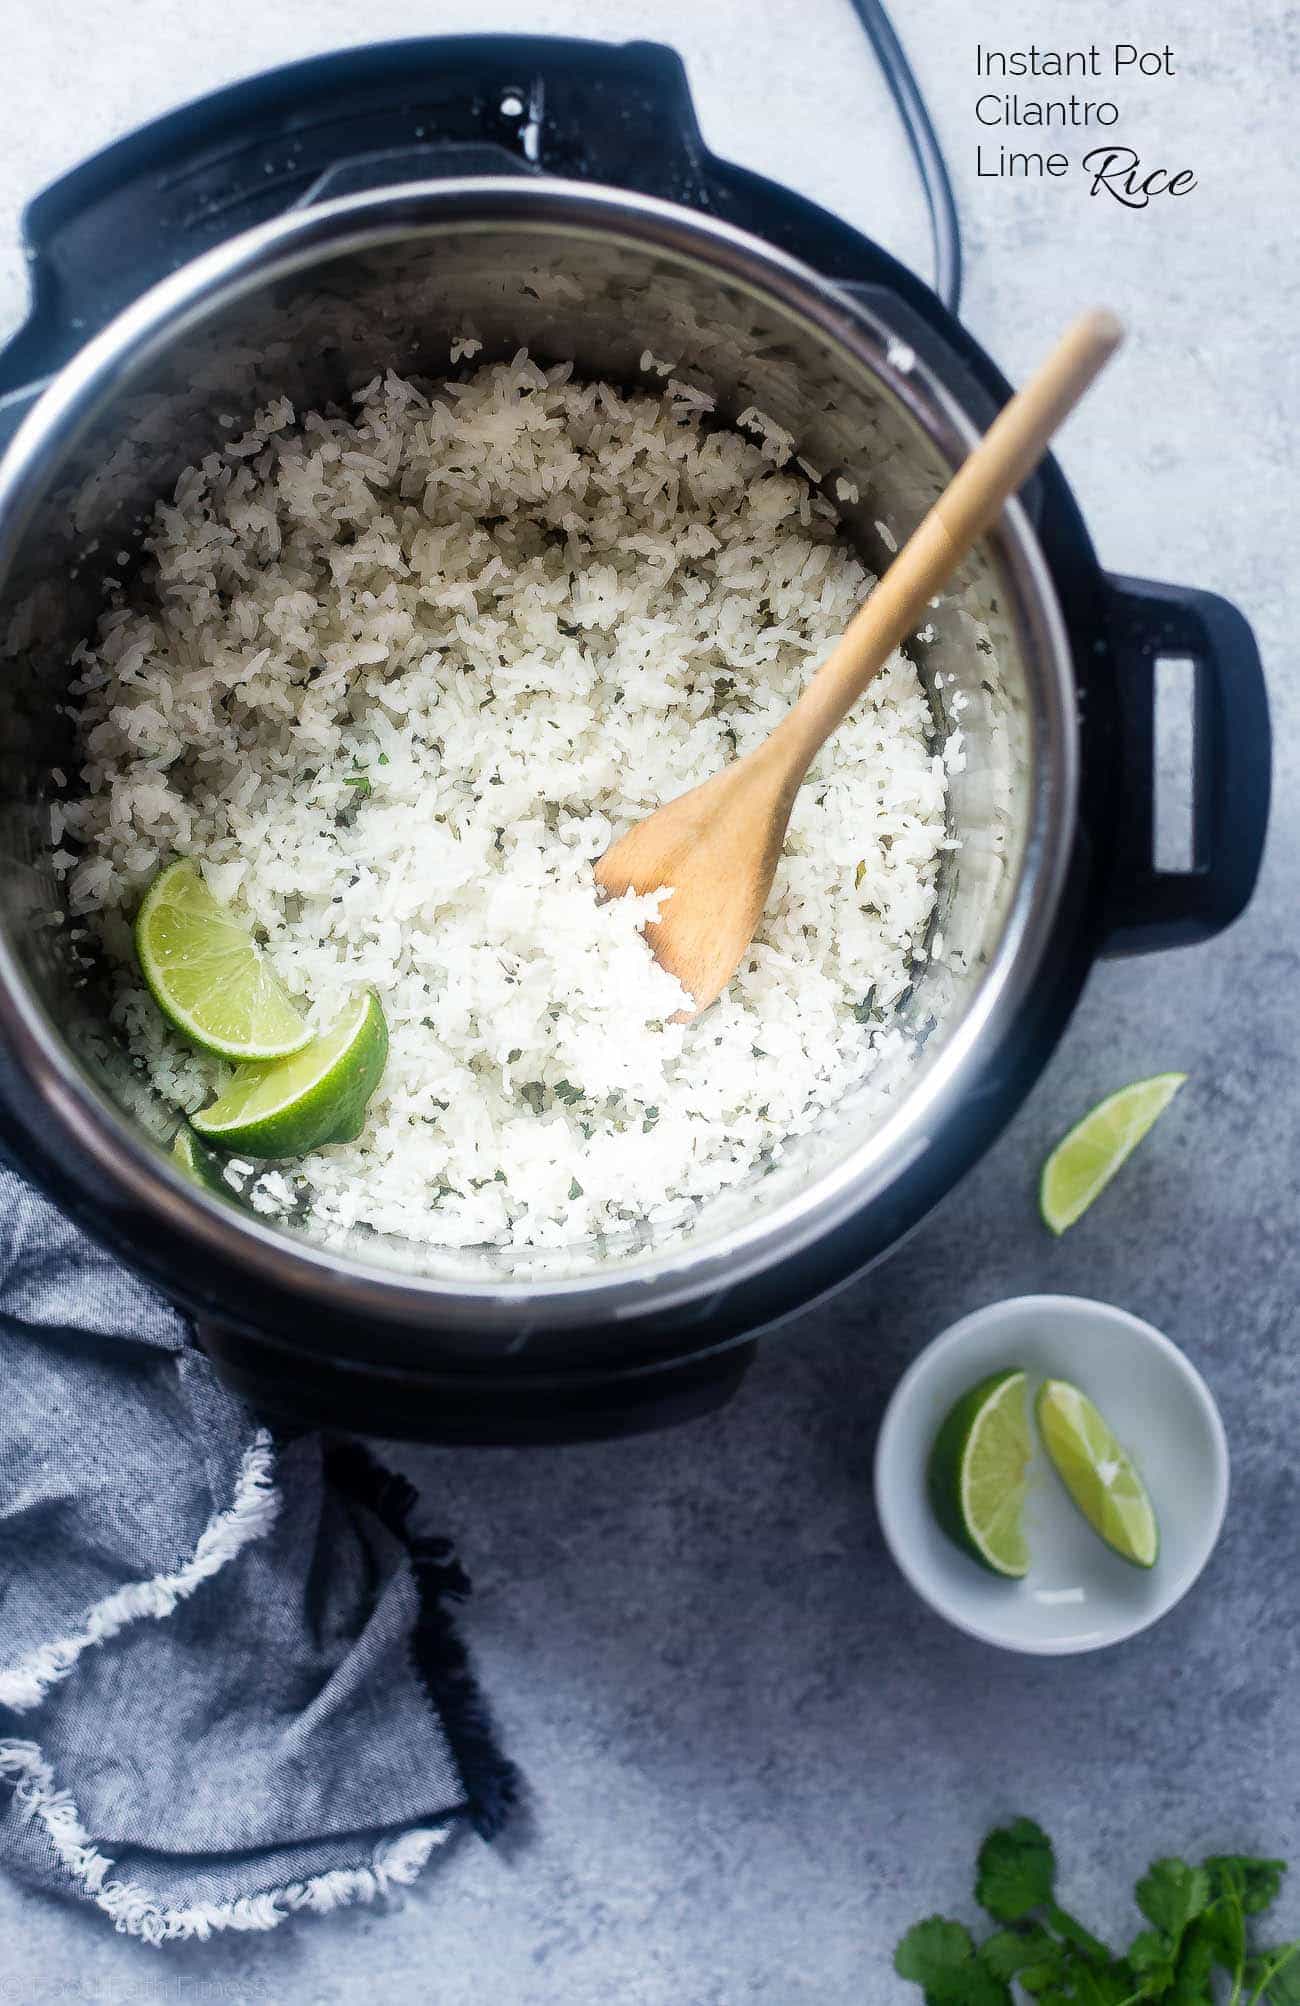 Instant Pot Cilantro Lime Rice - This super easy rice tastes like Chipotle's, is only 3 ingredients and is ready in 12 minutes - the perfect healthy side dish! | Foodfaithfitness.com | @FoodFaithFit